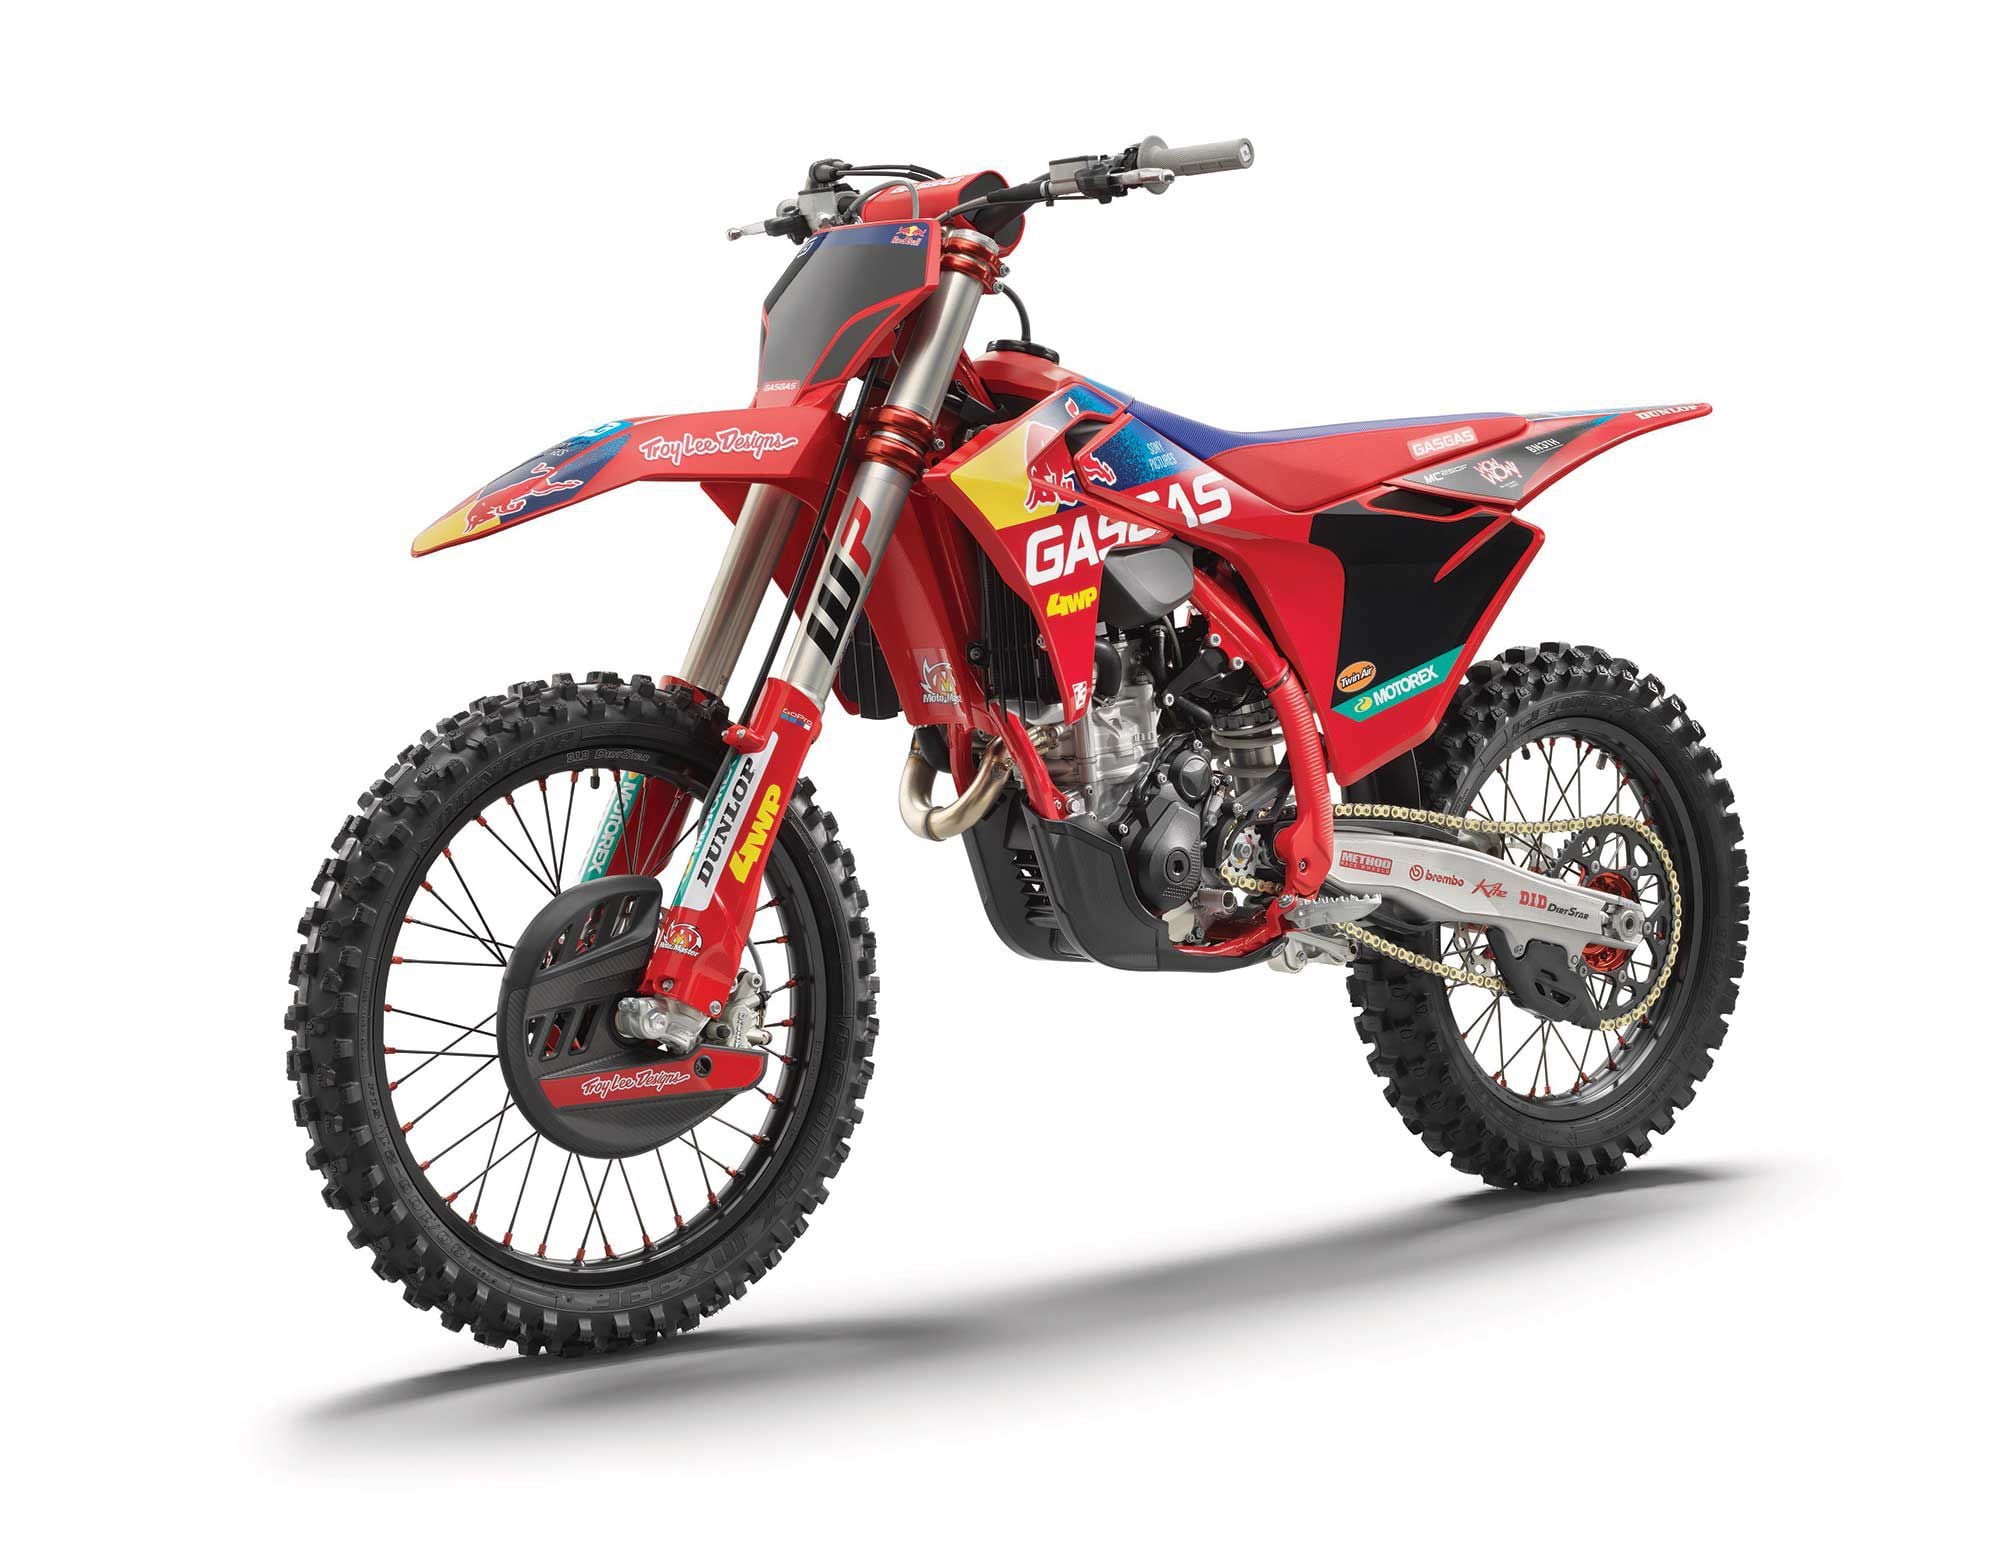 The MC 250F Factory Edition comes standard with front disc guard, carbon-composite skid plate, and red frame guards. Its engine is basically new from inside out from the five-speed gearbox, cases, cylinder, and piston up to its twin-cam head. Like the 450, it has a complete list of electronic rider aids (launch control, traction control, quickshifter, and choice of engine maps).